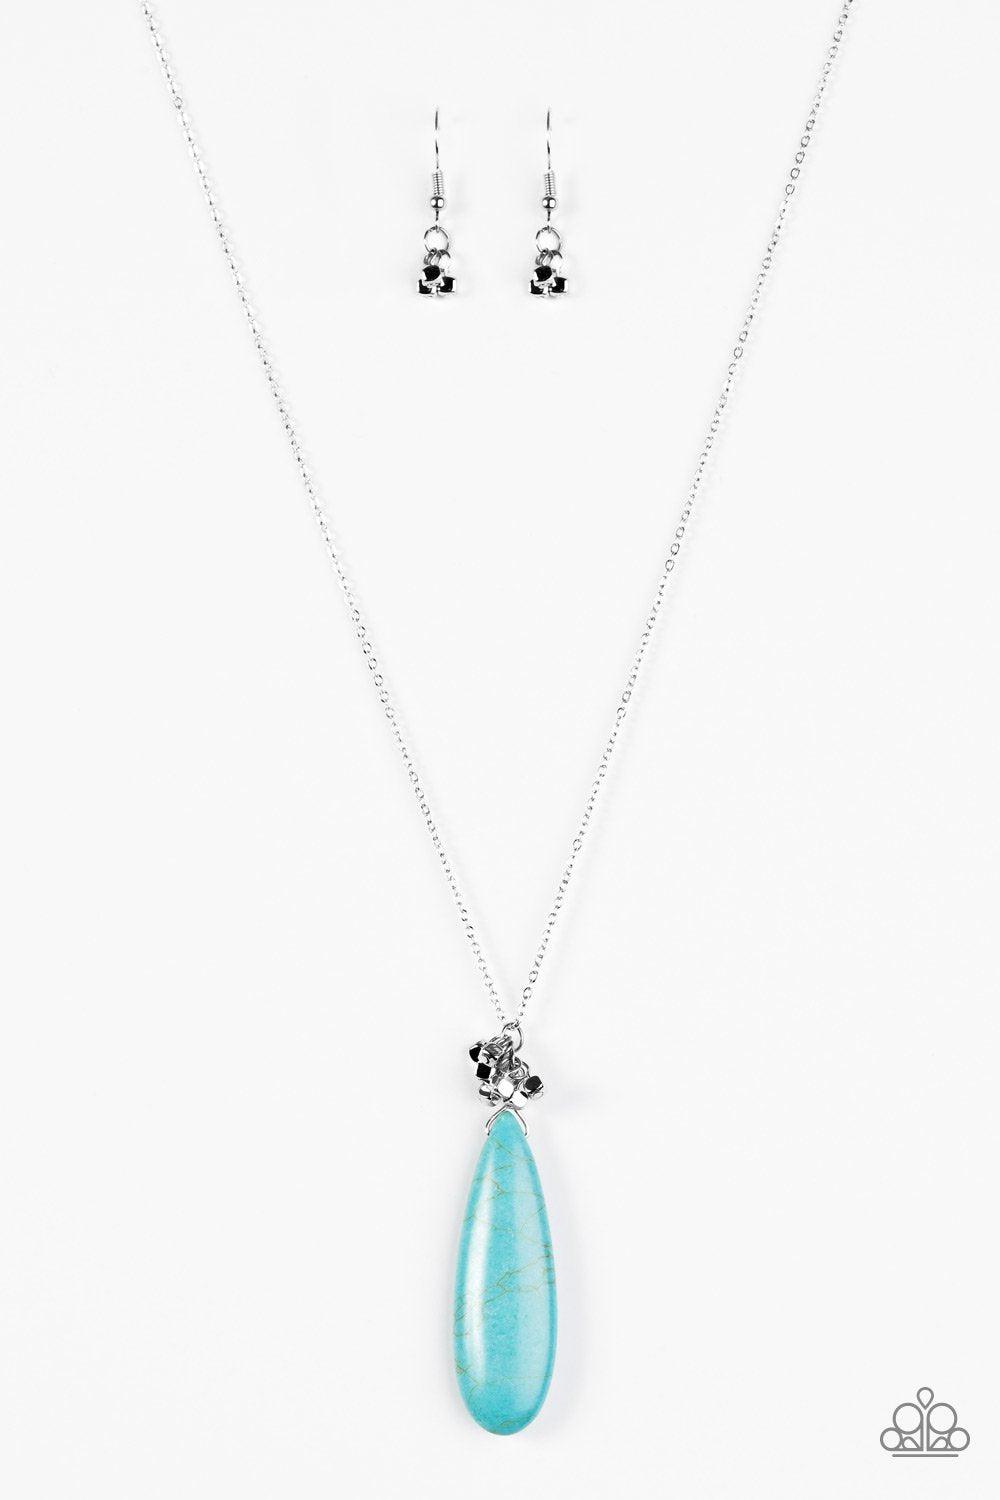 Canyon Craze Turquoise Blue Teardrop Necklace - Paparazzi Accessories-CarasShop.com - $5 Jewelry by Cara Jewels